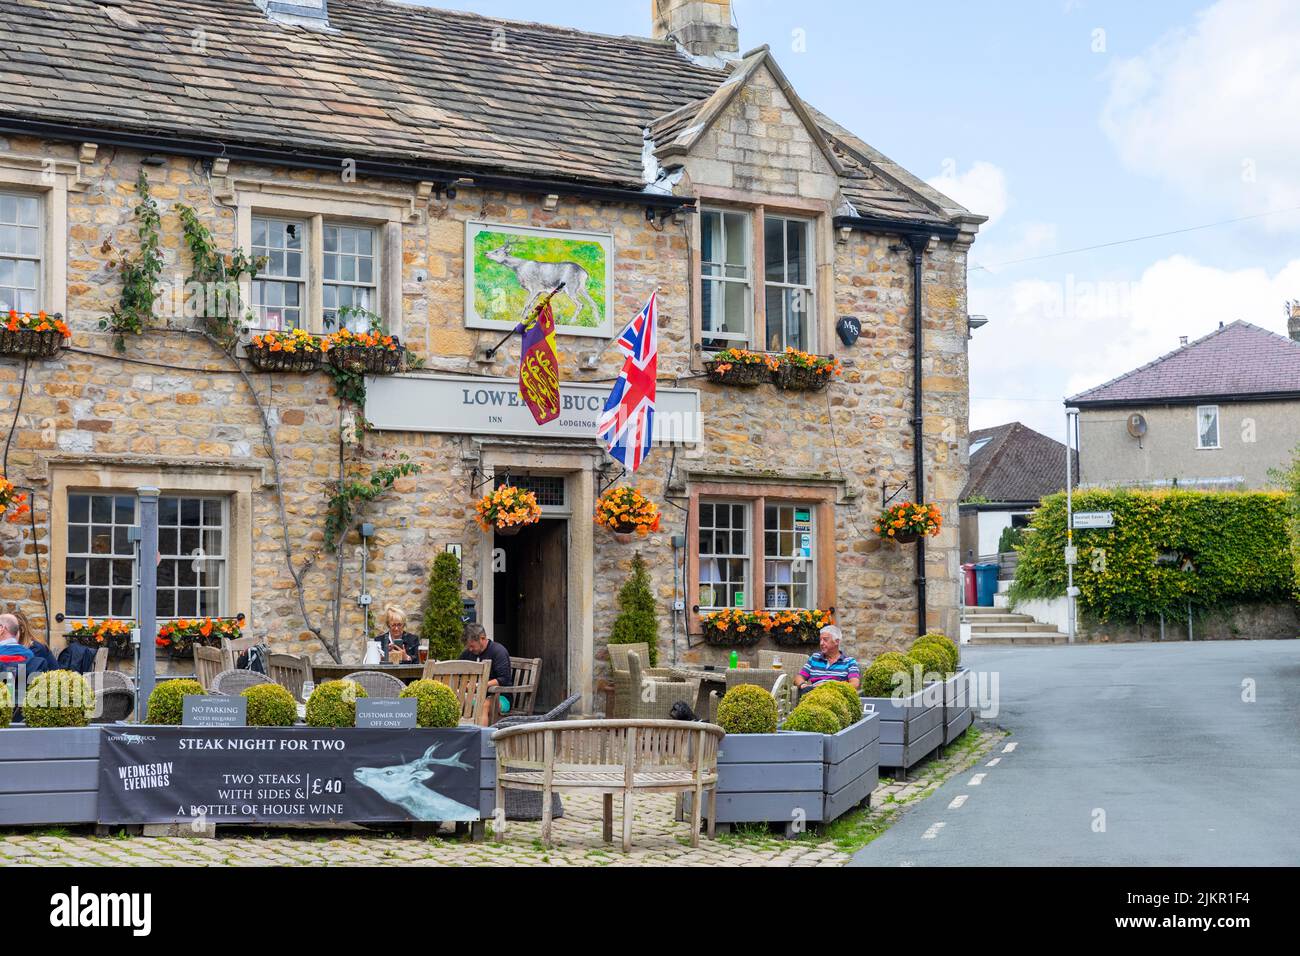 Waddington Village in the Ribble Valley Lancashire, Lower Buck Inn pub and restaurant, summers day with people outside,England,UK Stock Photo